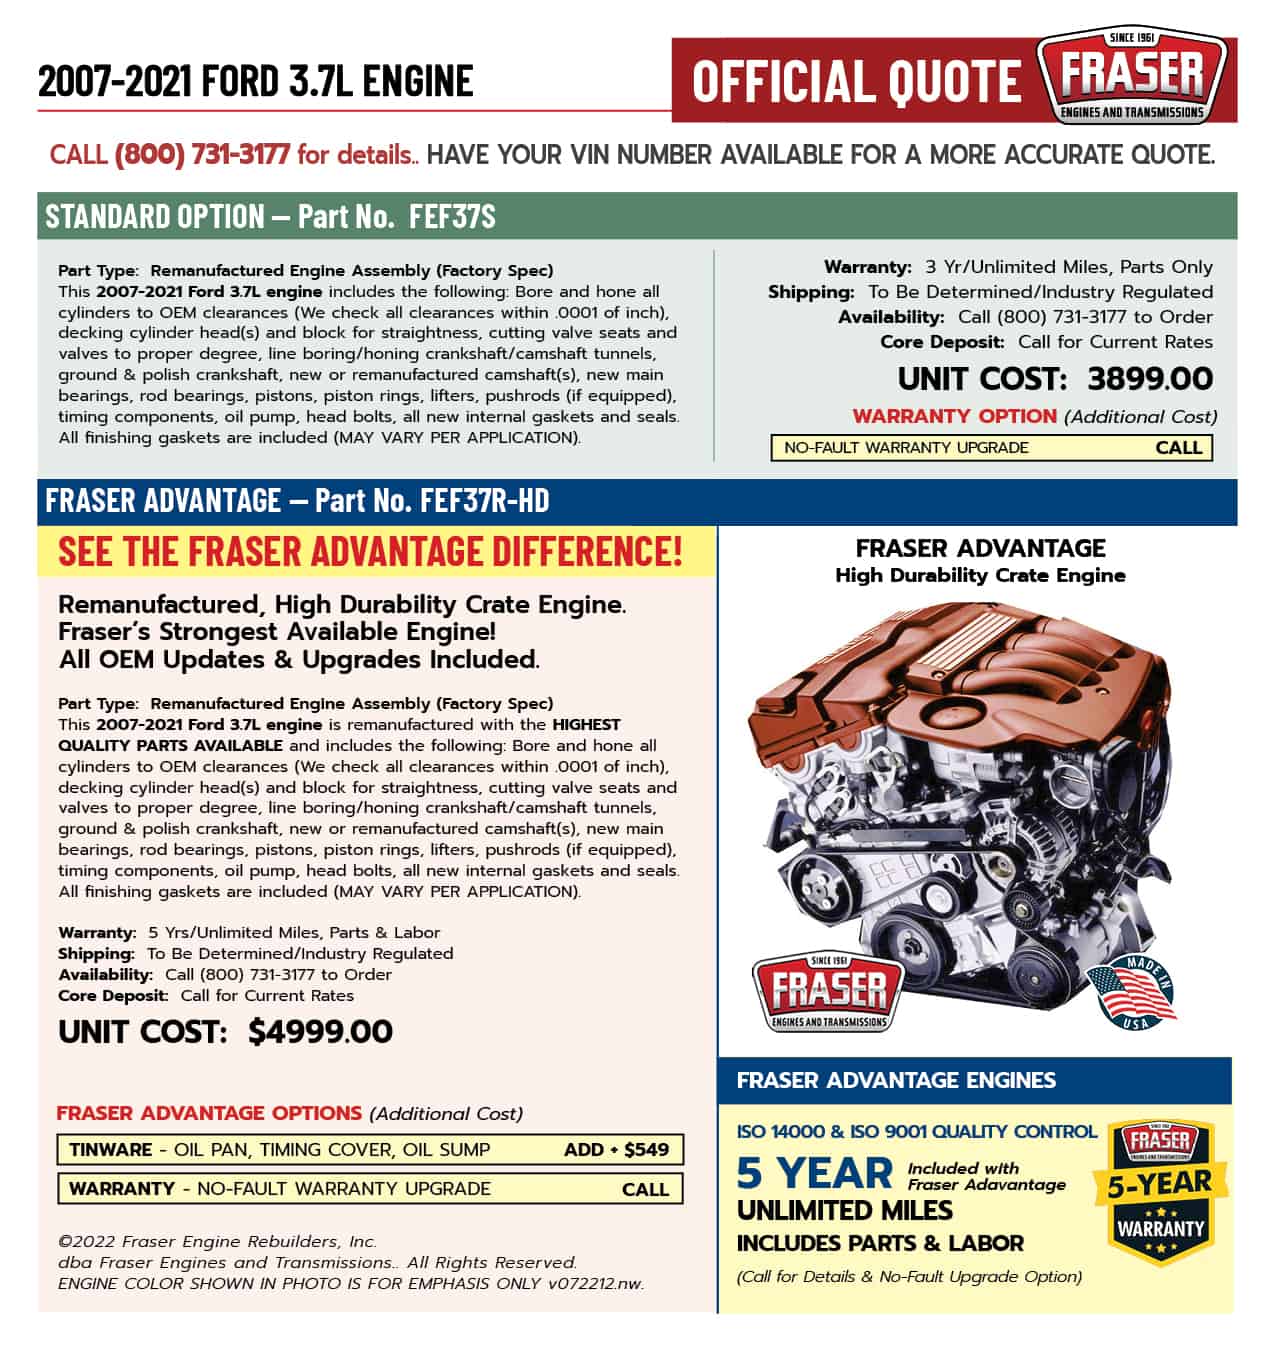 2007-2020 Ford 3.7 Liter Engines